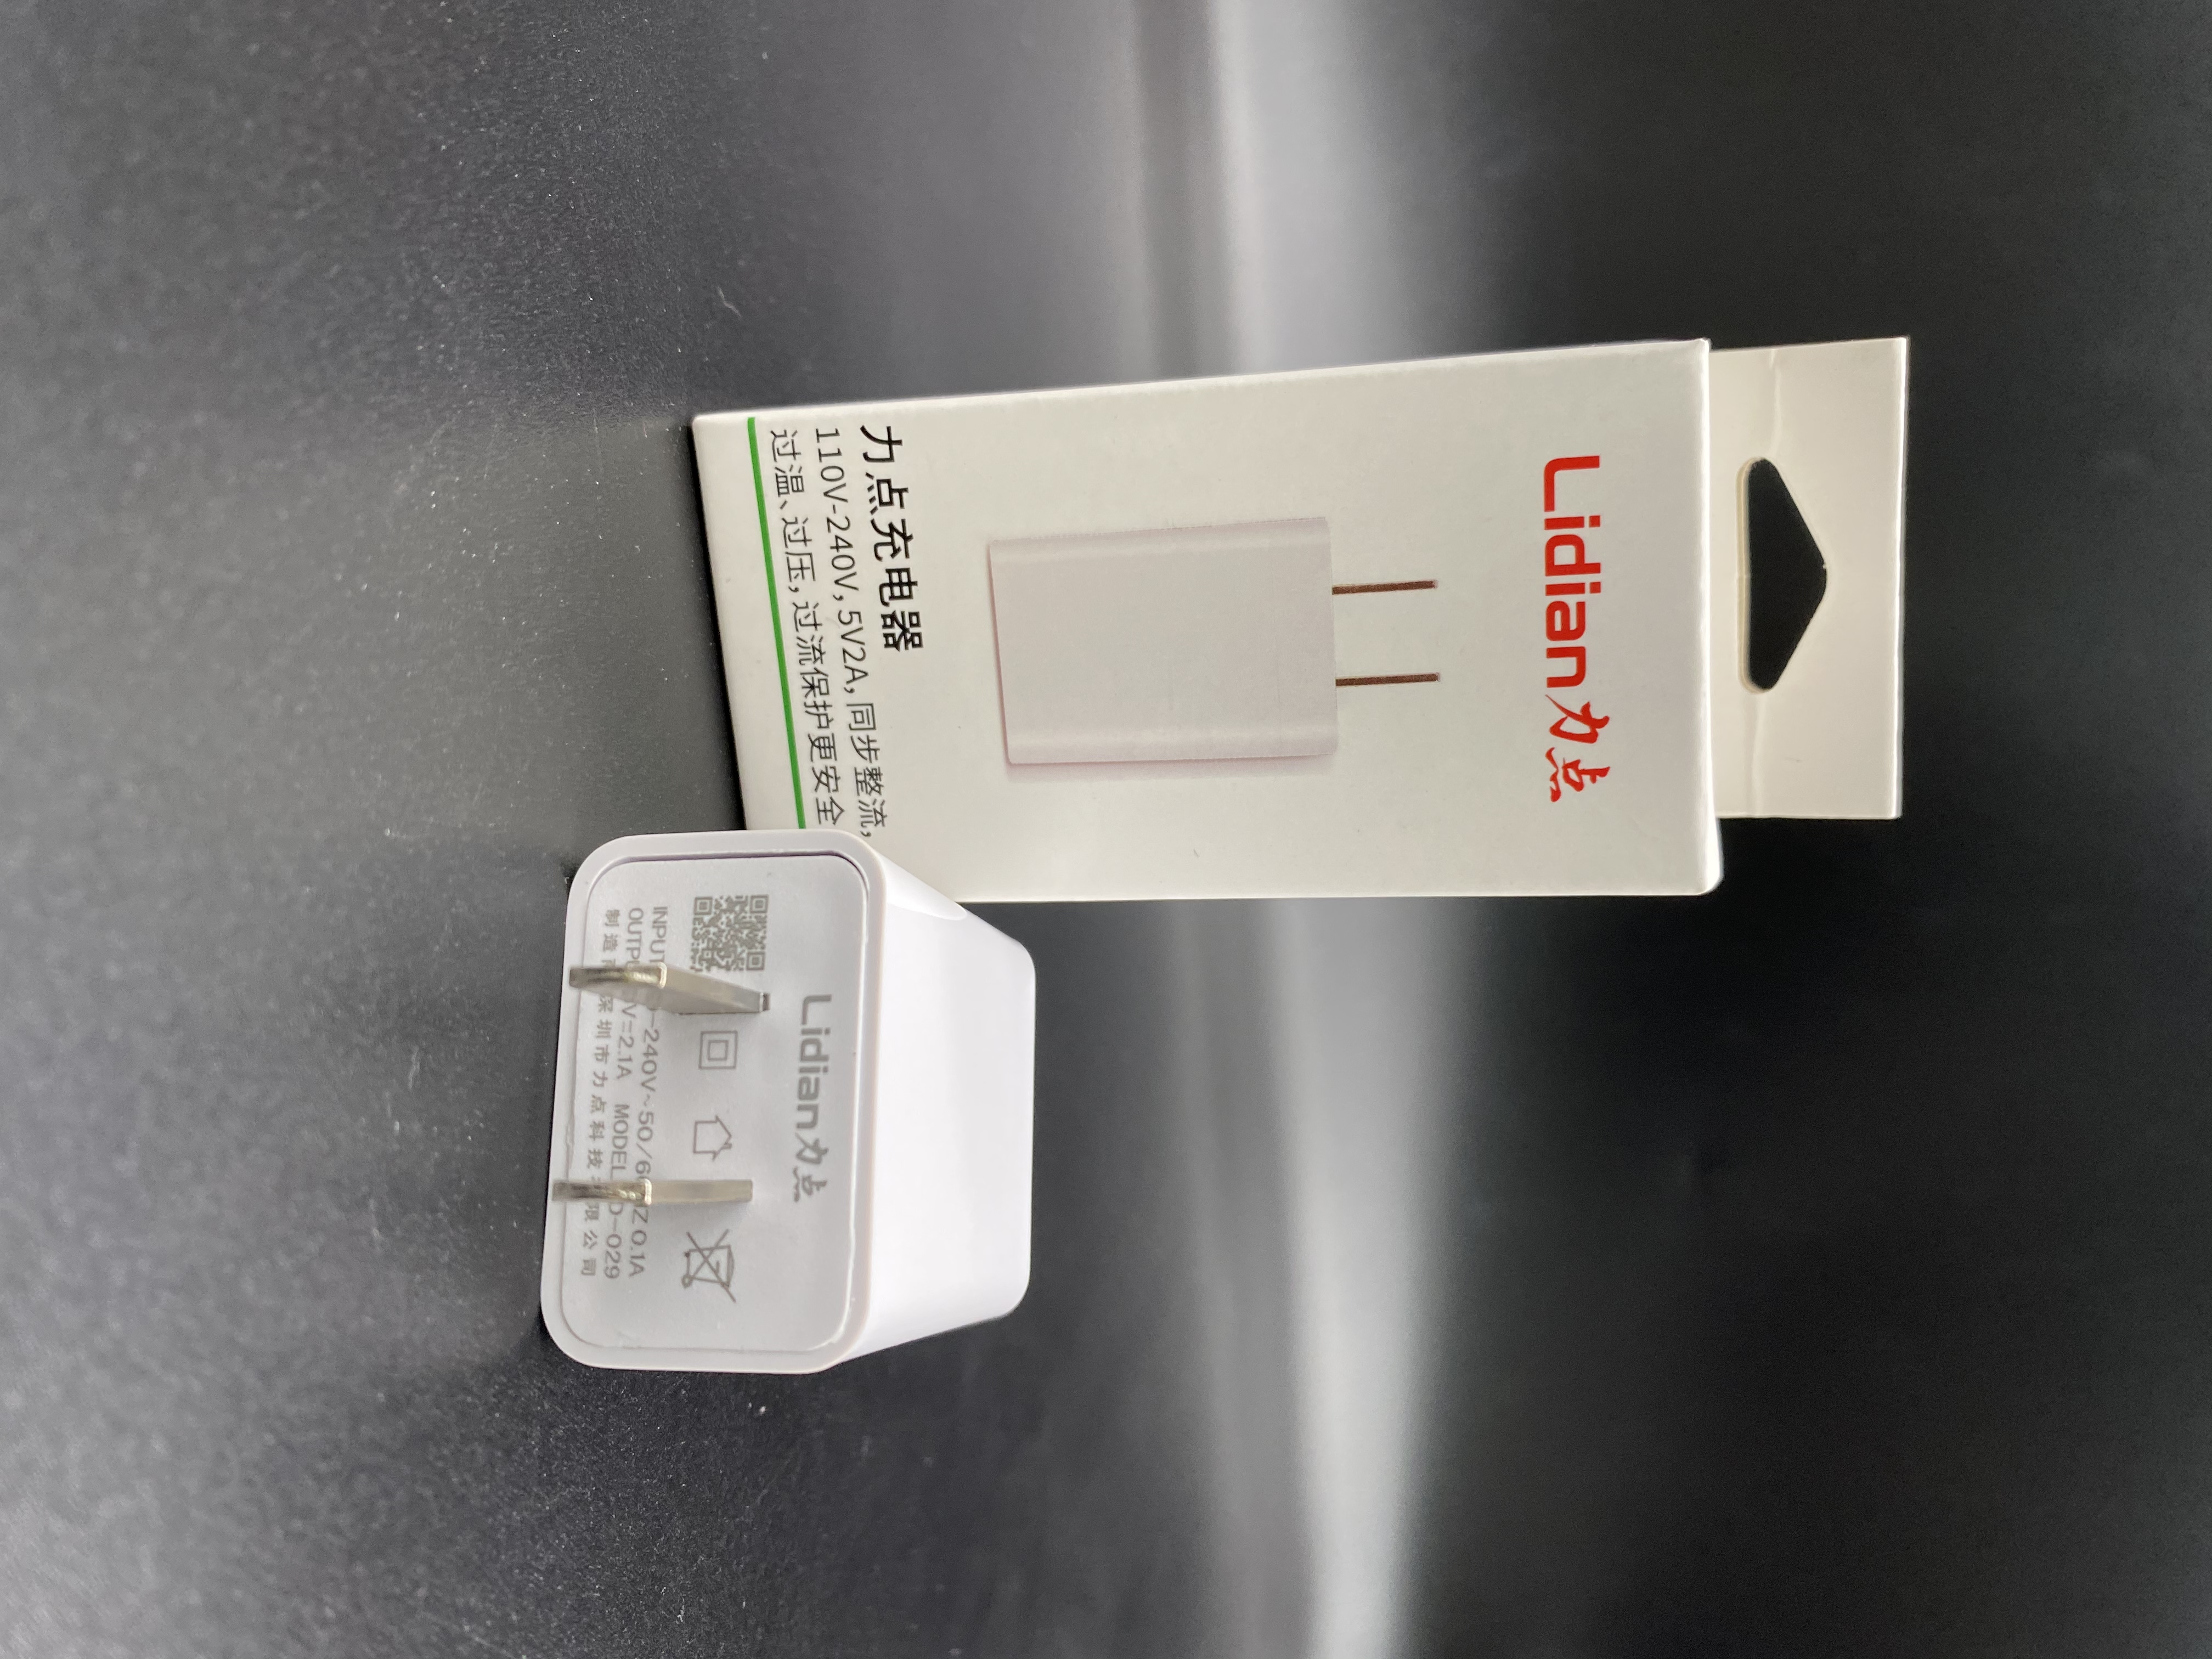 USB charger Manufacturers, USB charger Factory, Supply USB charger